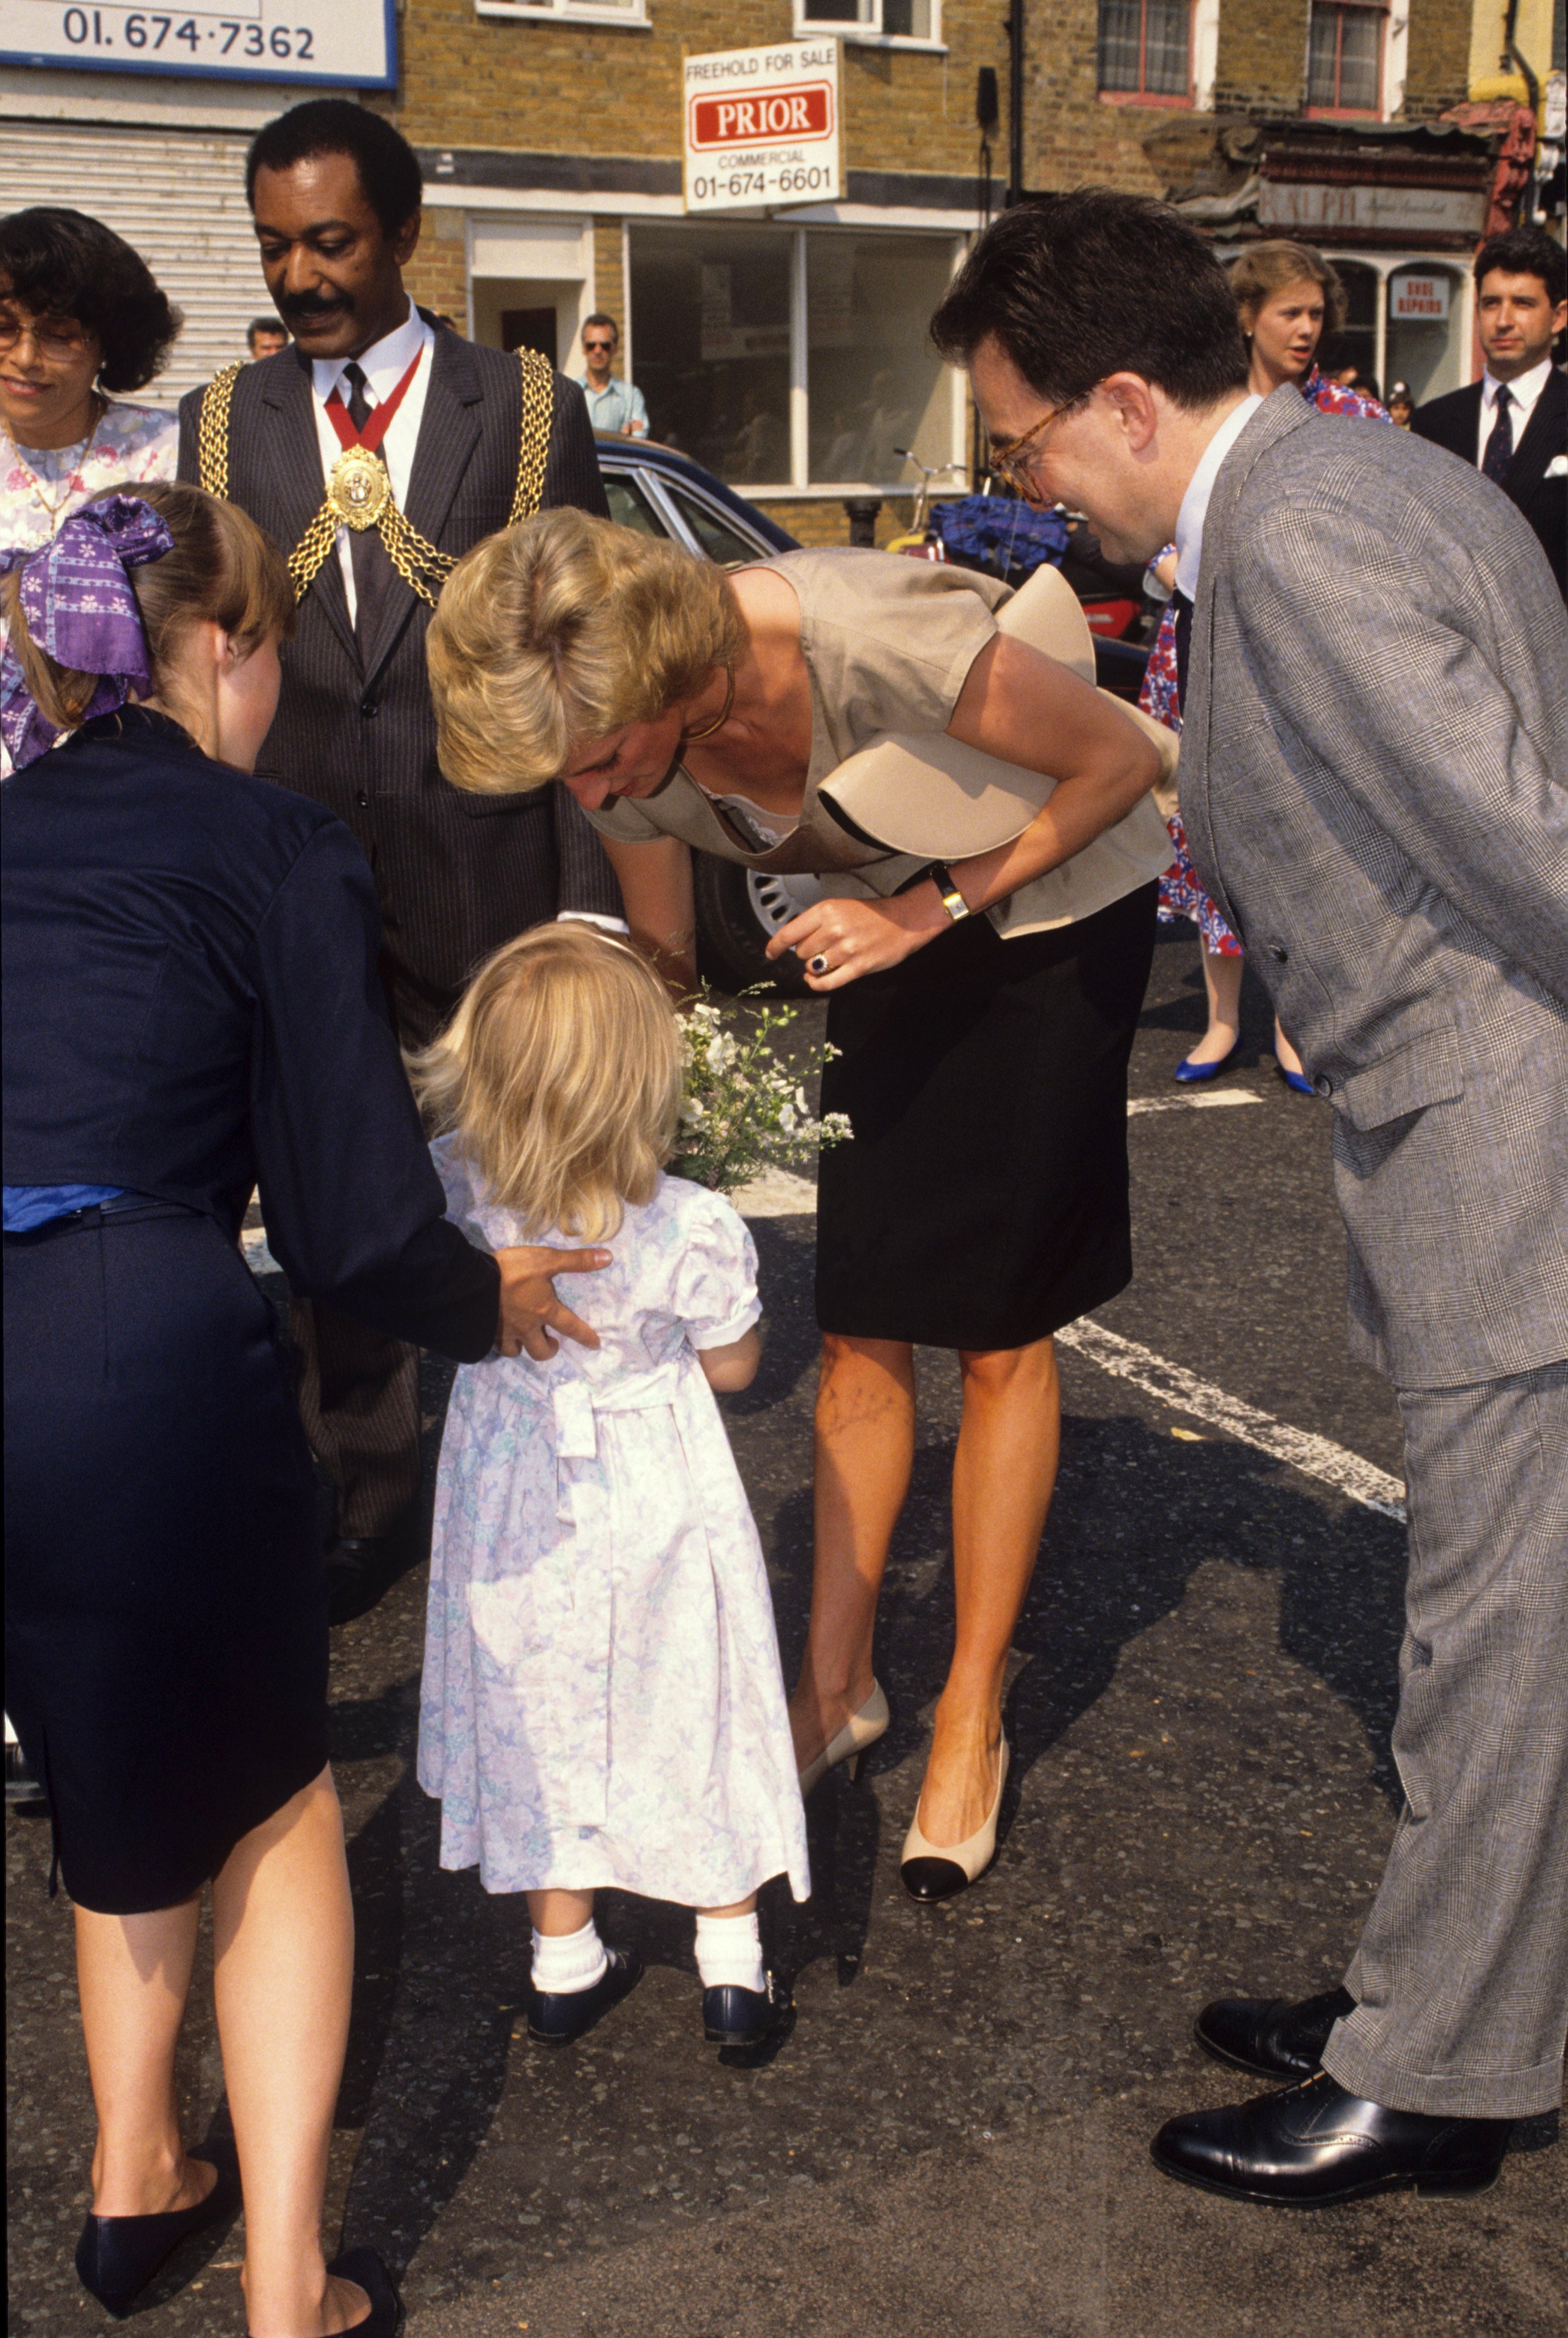 Princess Diana at the opening of the Landmark Centre for AIDS patients, in London in 1989.